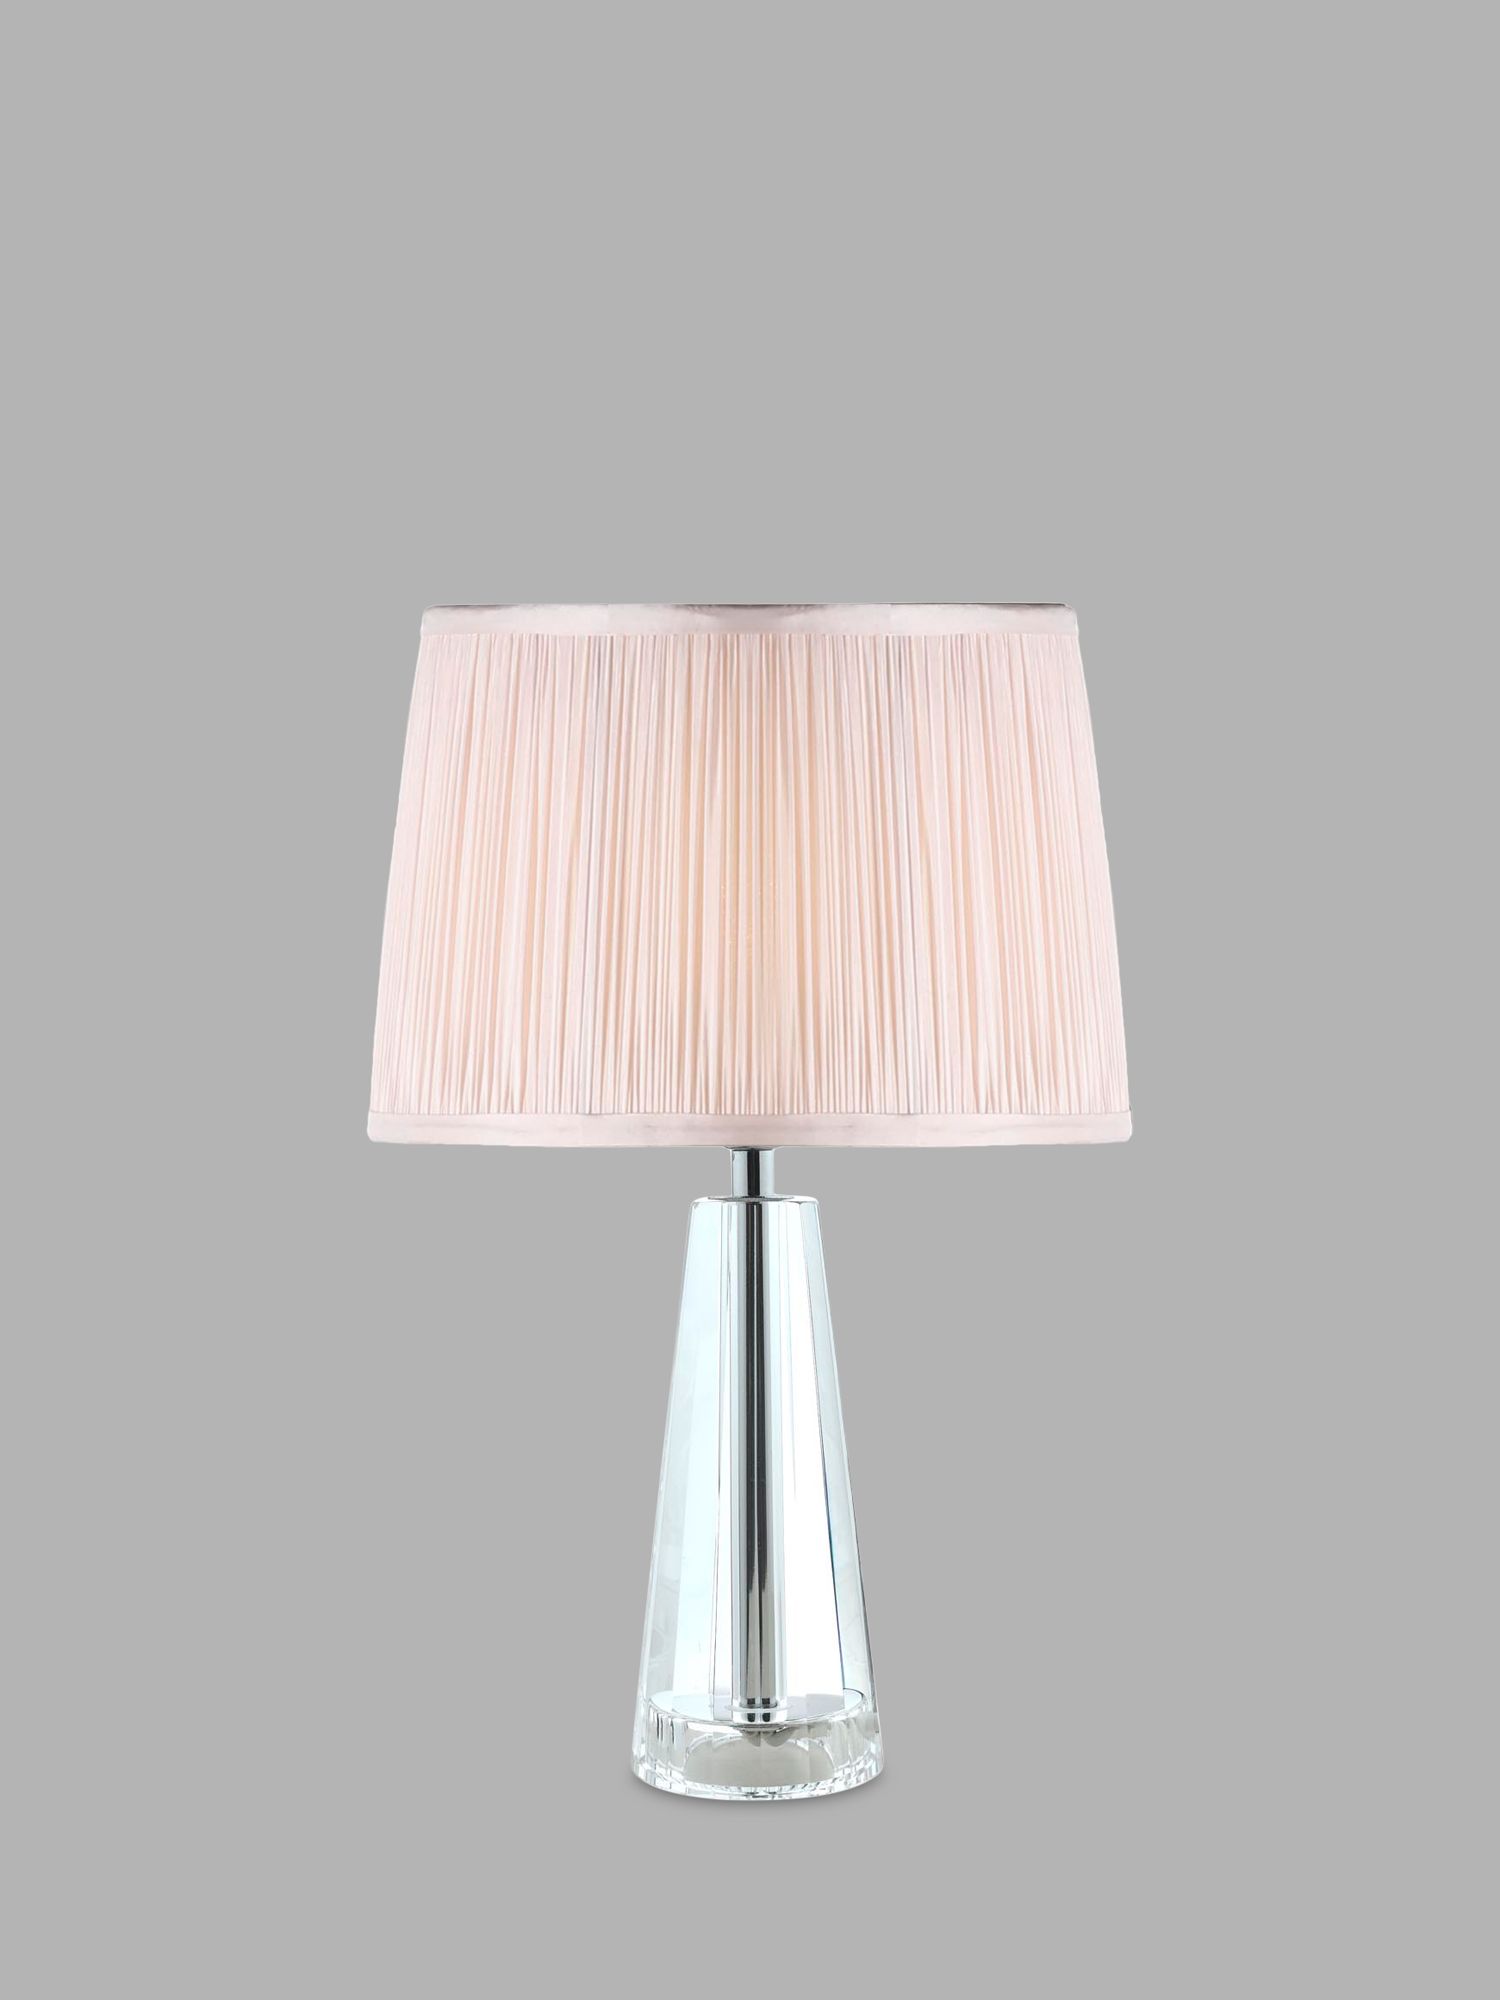 Photo of Laura ashley blake petite crystal glass table lamp clear